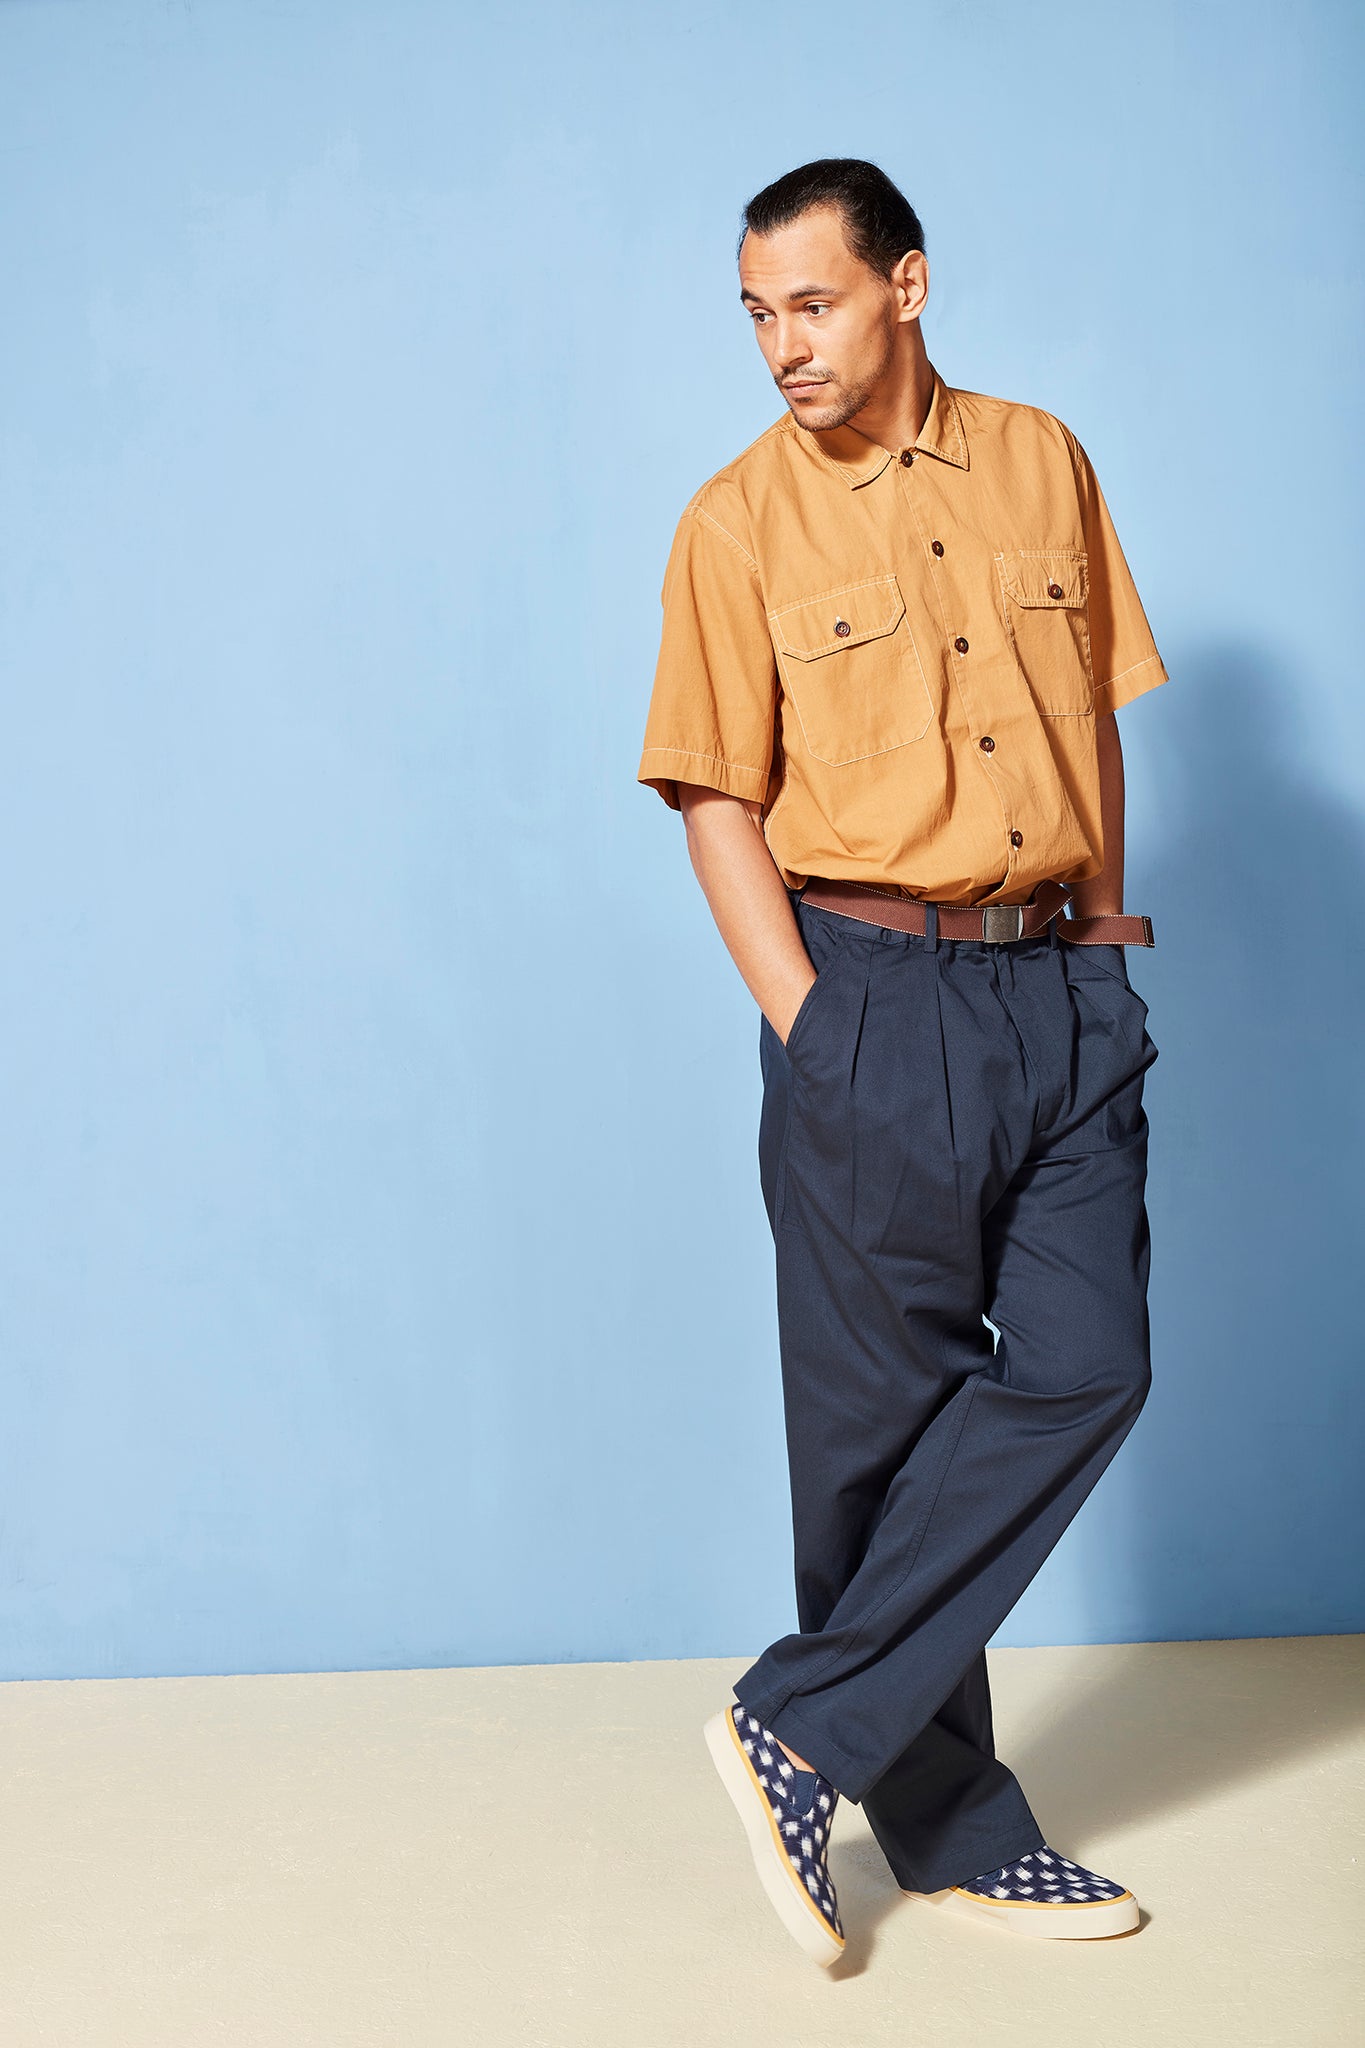 SS20, short sleeve overshirt with pleated trousers and Sebago slip on shoes